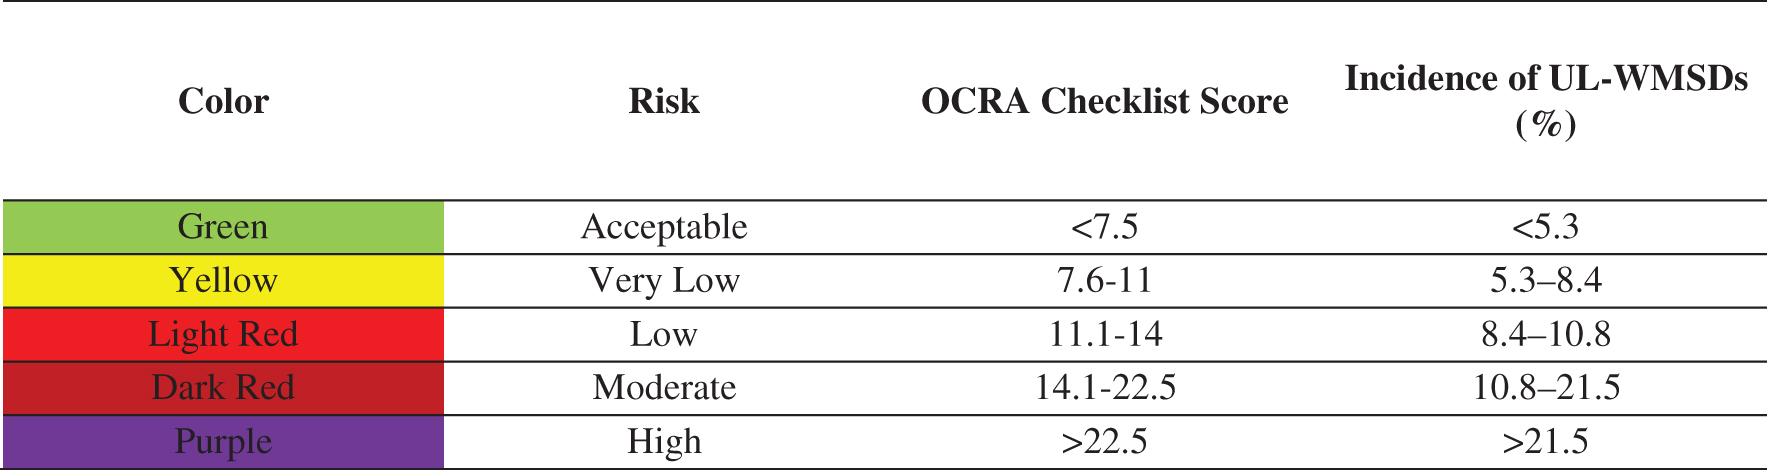 Risk assessment of upper-limb repetitive movements according to the OCRA Checklist